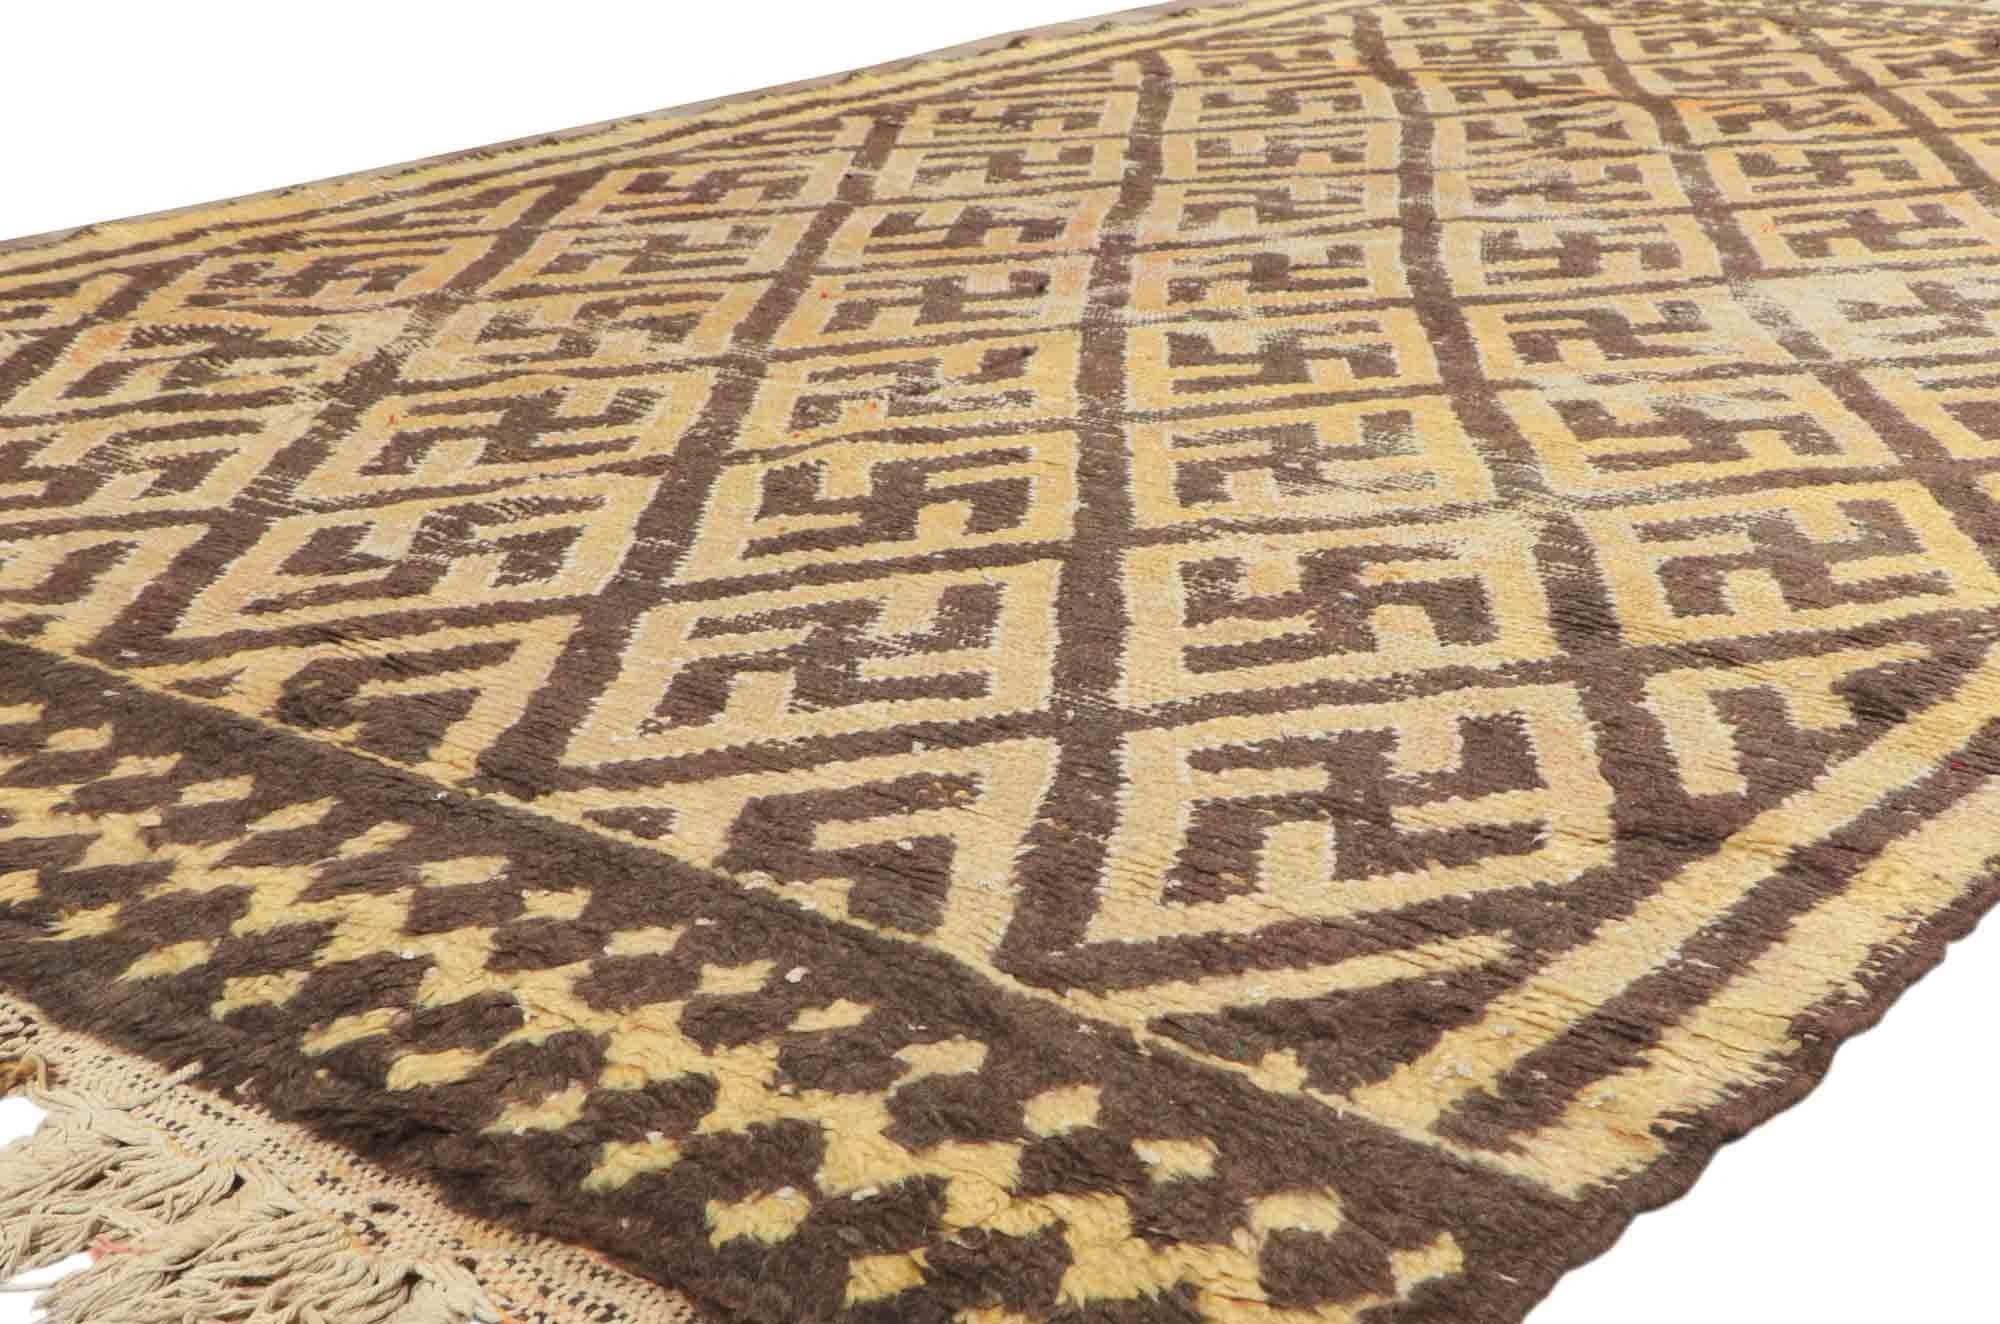 21669 Distressed Vintage Berber Moroccan Rug with Tribal Style 06'06 x 11'05.
Desirable Age Wear. Abrash.
Hand-knotted wool.
Berber Tribes of Morocco.
Made in Morocco.